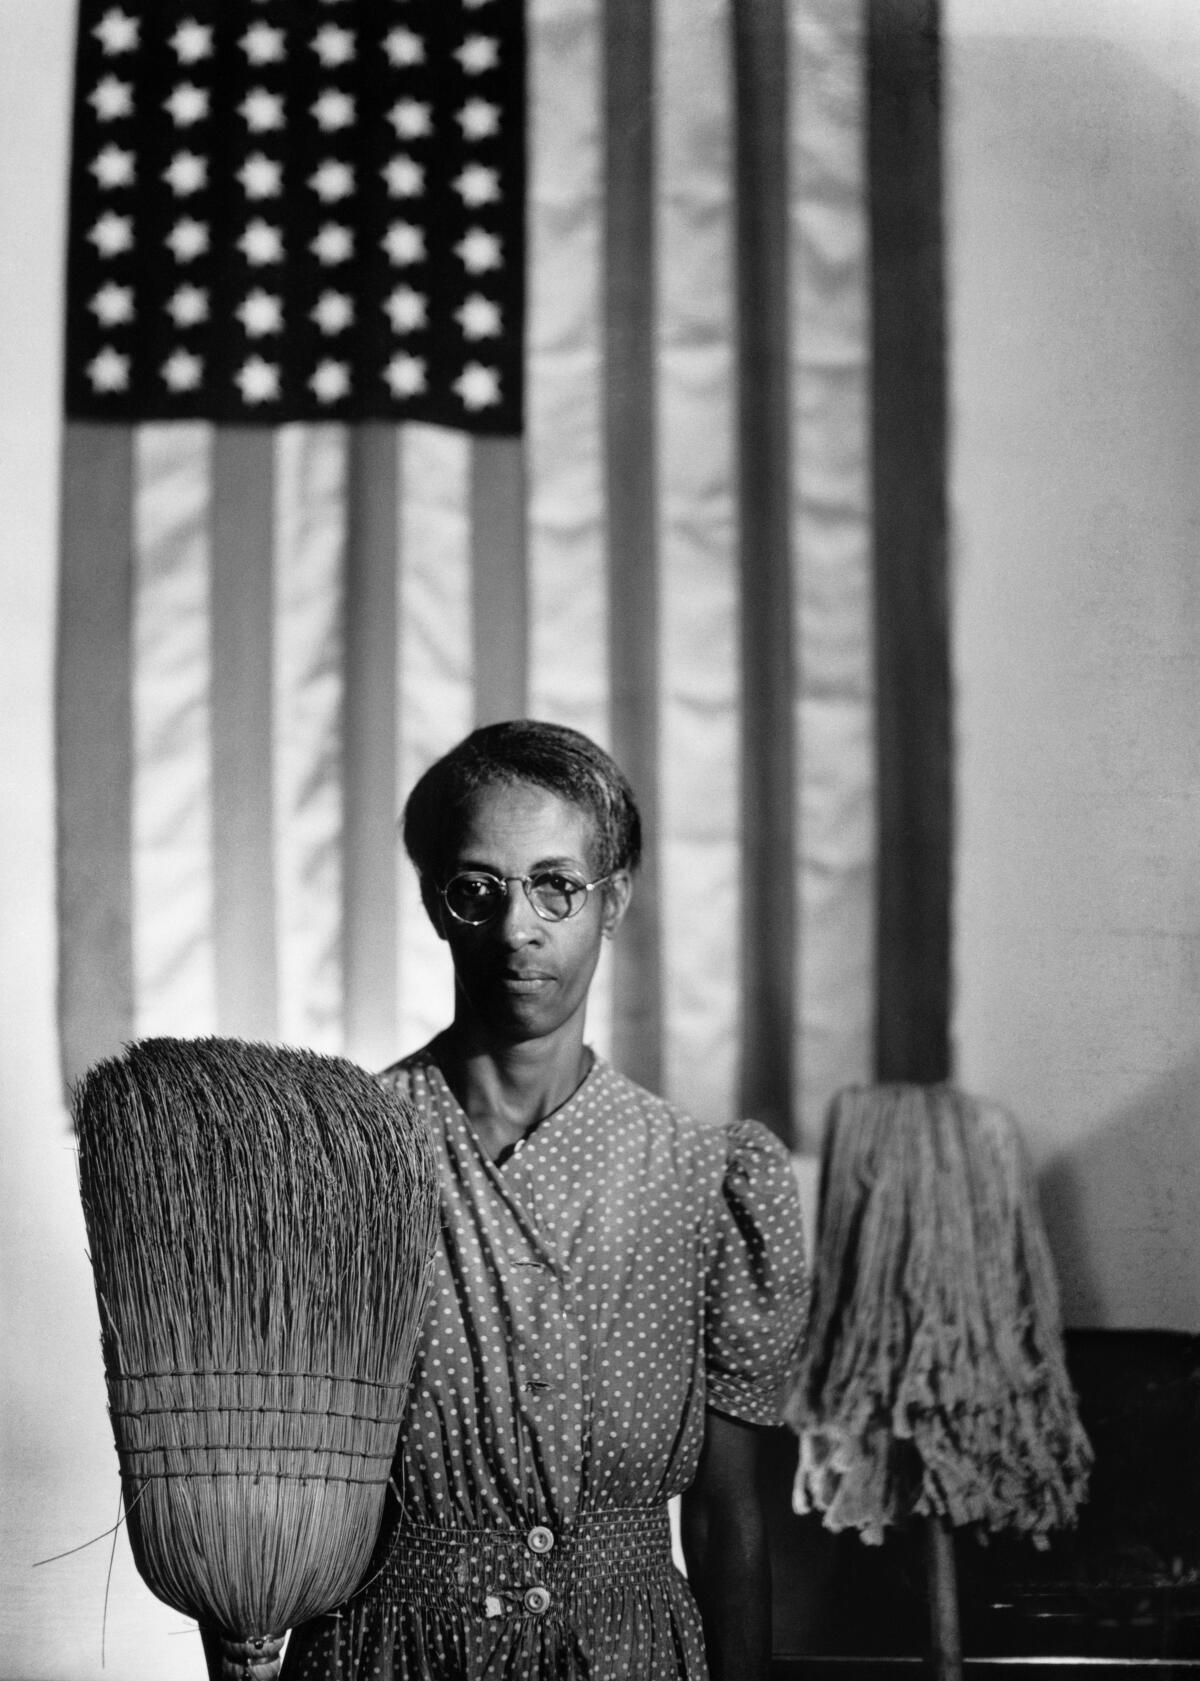 Ella Watson looks into the camera while holding a broom, an American flag behind her, in Gordon Parks' "American Gothic"